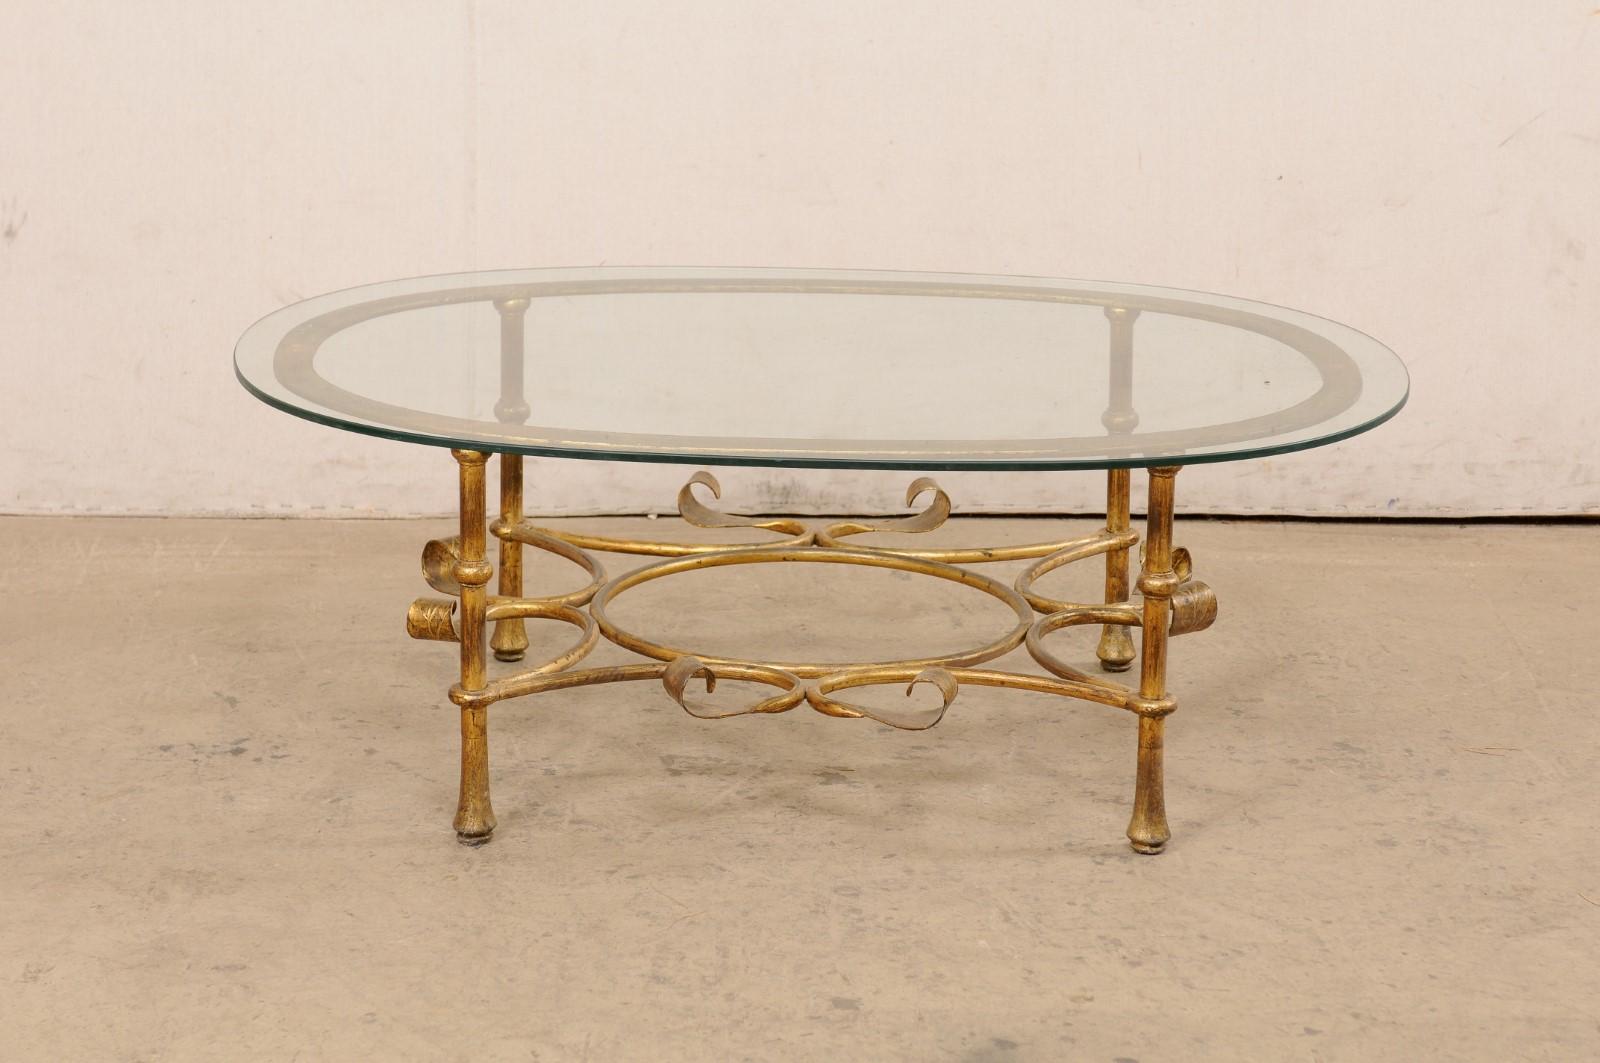 Spanish Oval Glass-Top Table with Iron Base (Gold Finish), Mid 20th C. 8